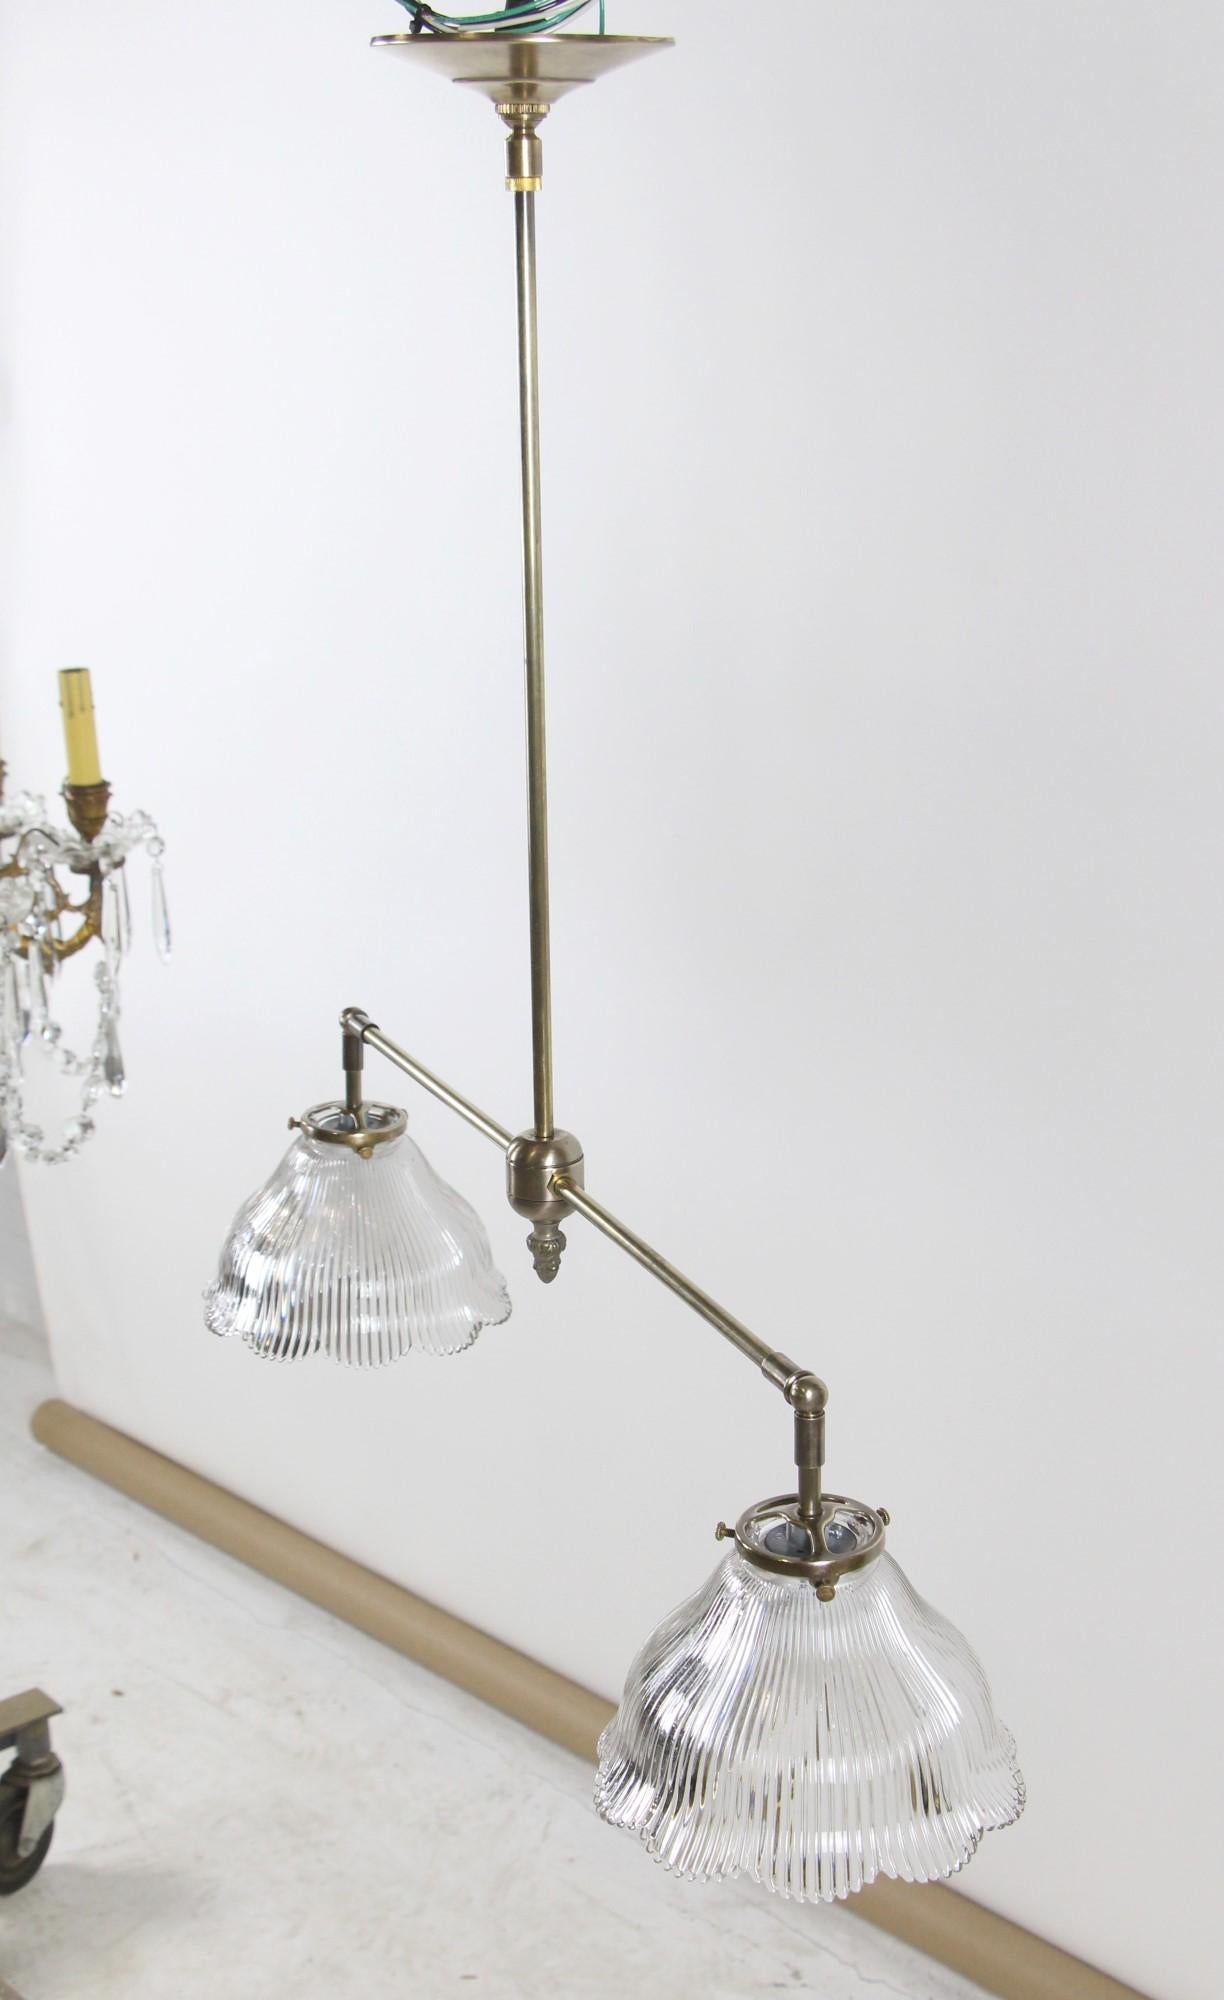 Contemporary 2010s Brass Pendant Light with Two Antique Ruffled Prism Glass Shades